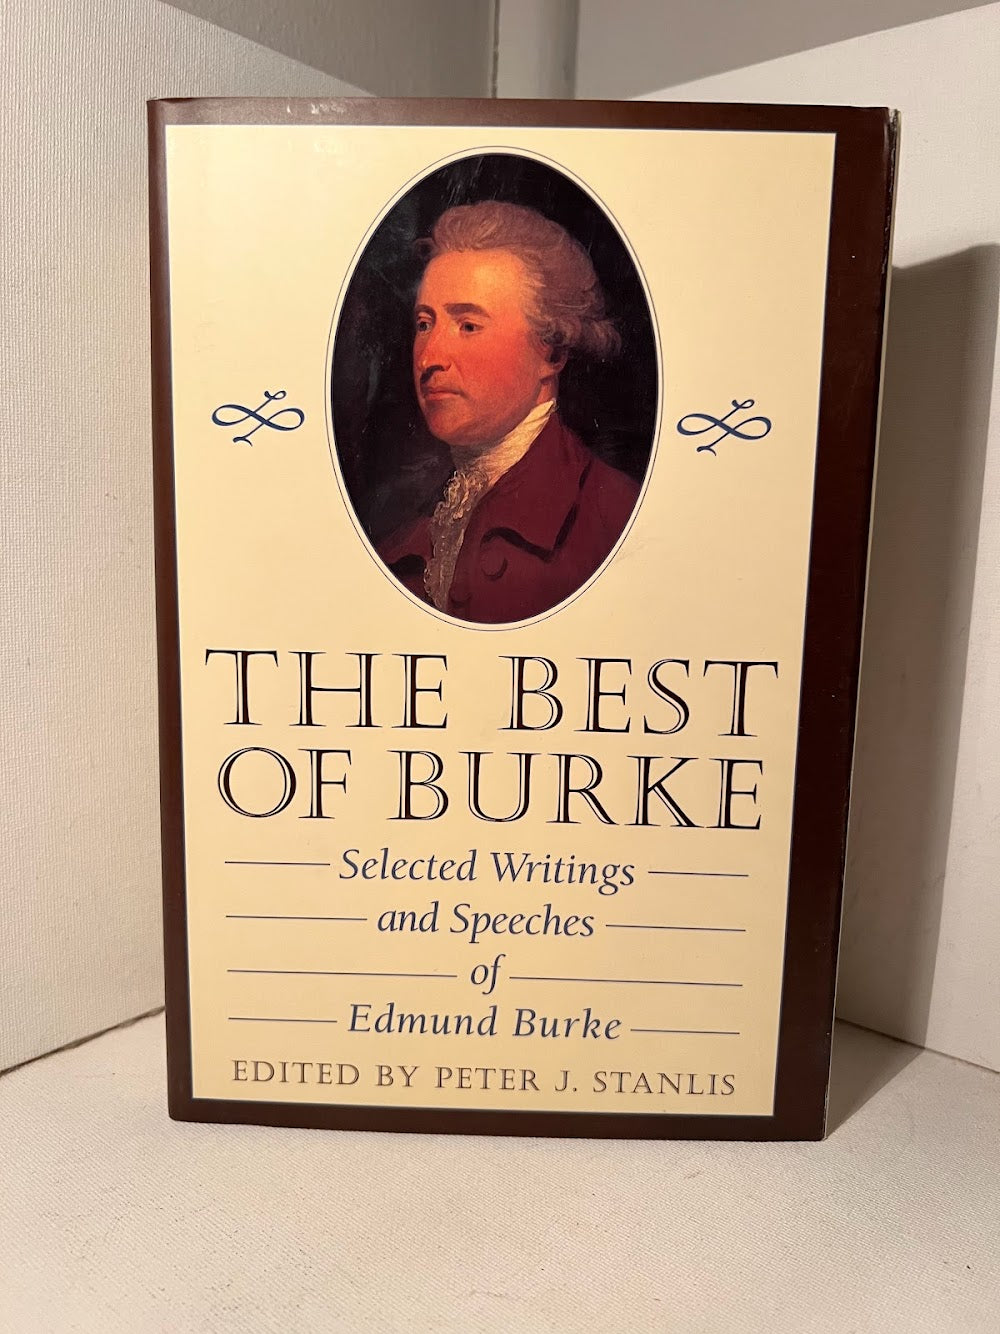 The Best of Burke & The Theory of Moral Sentiments by Adam Smith